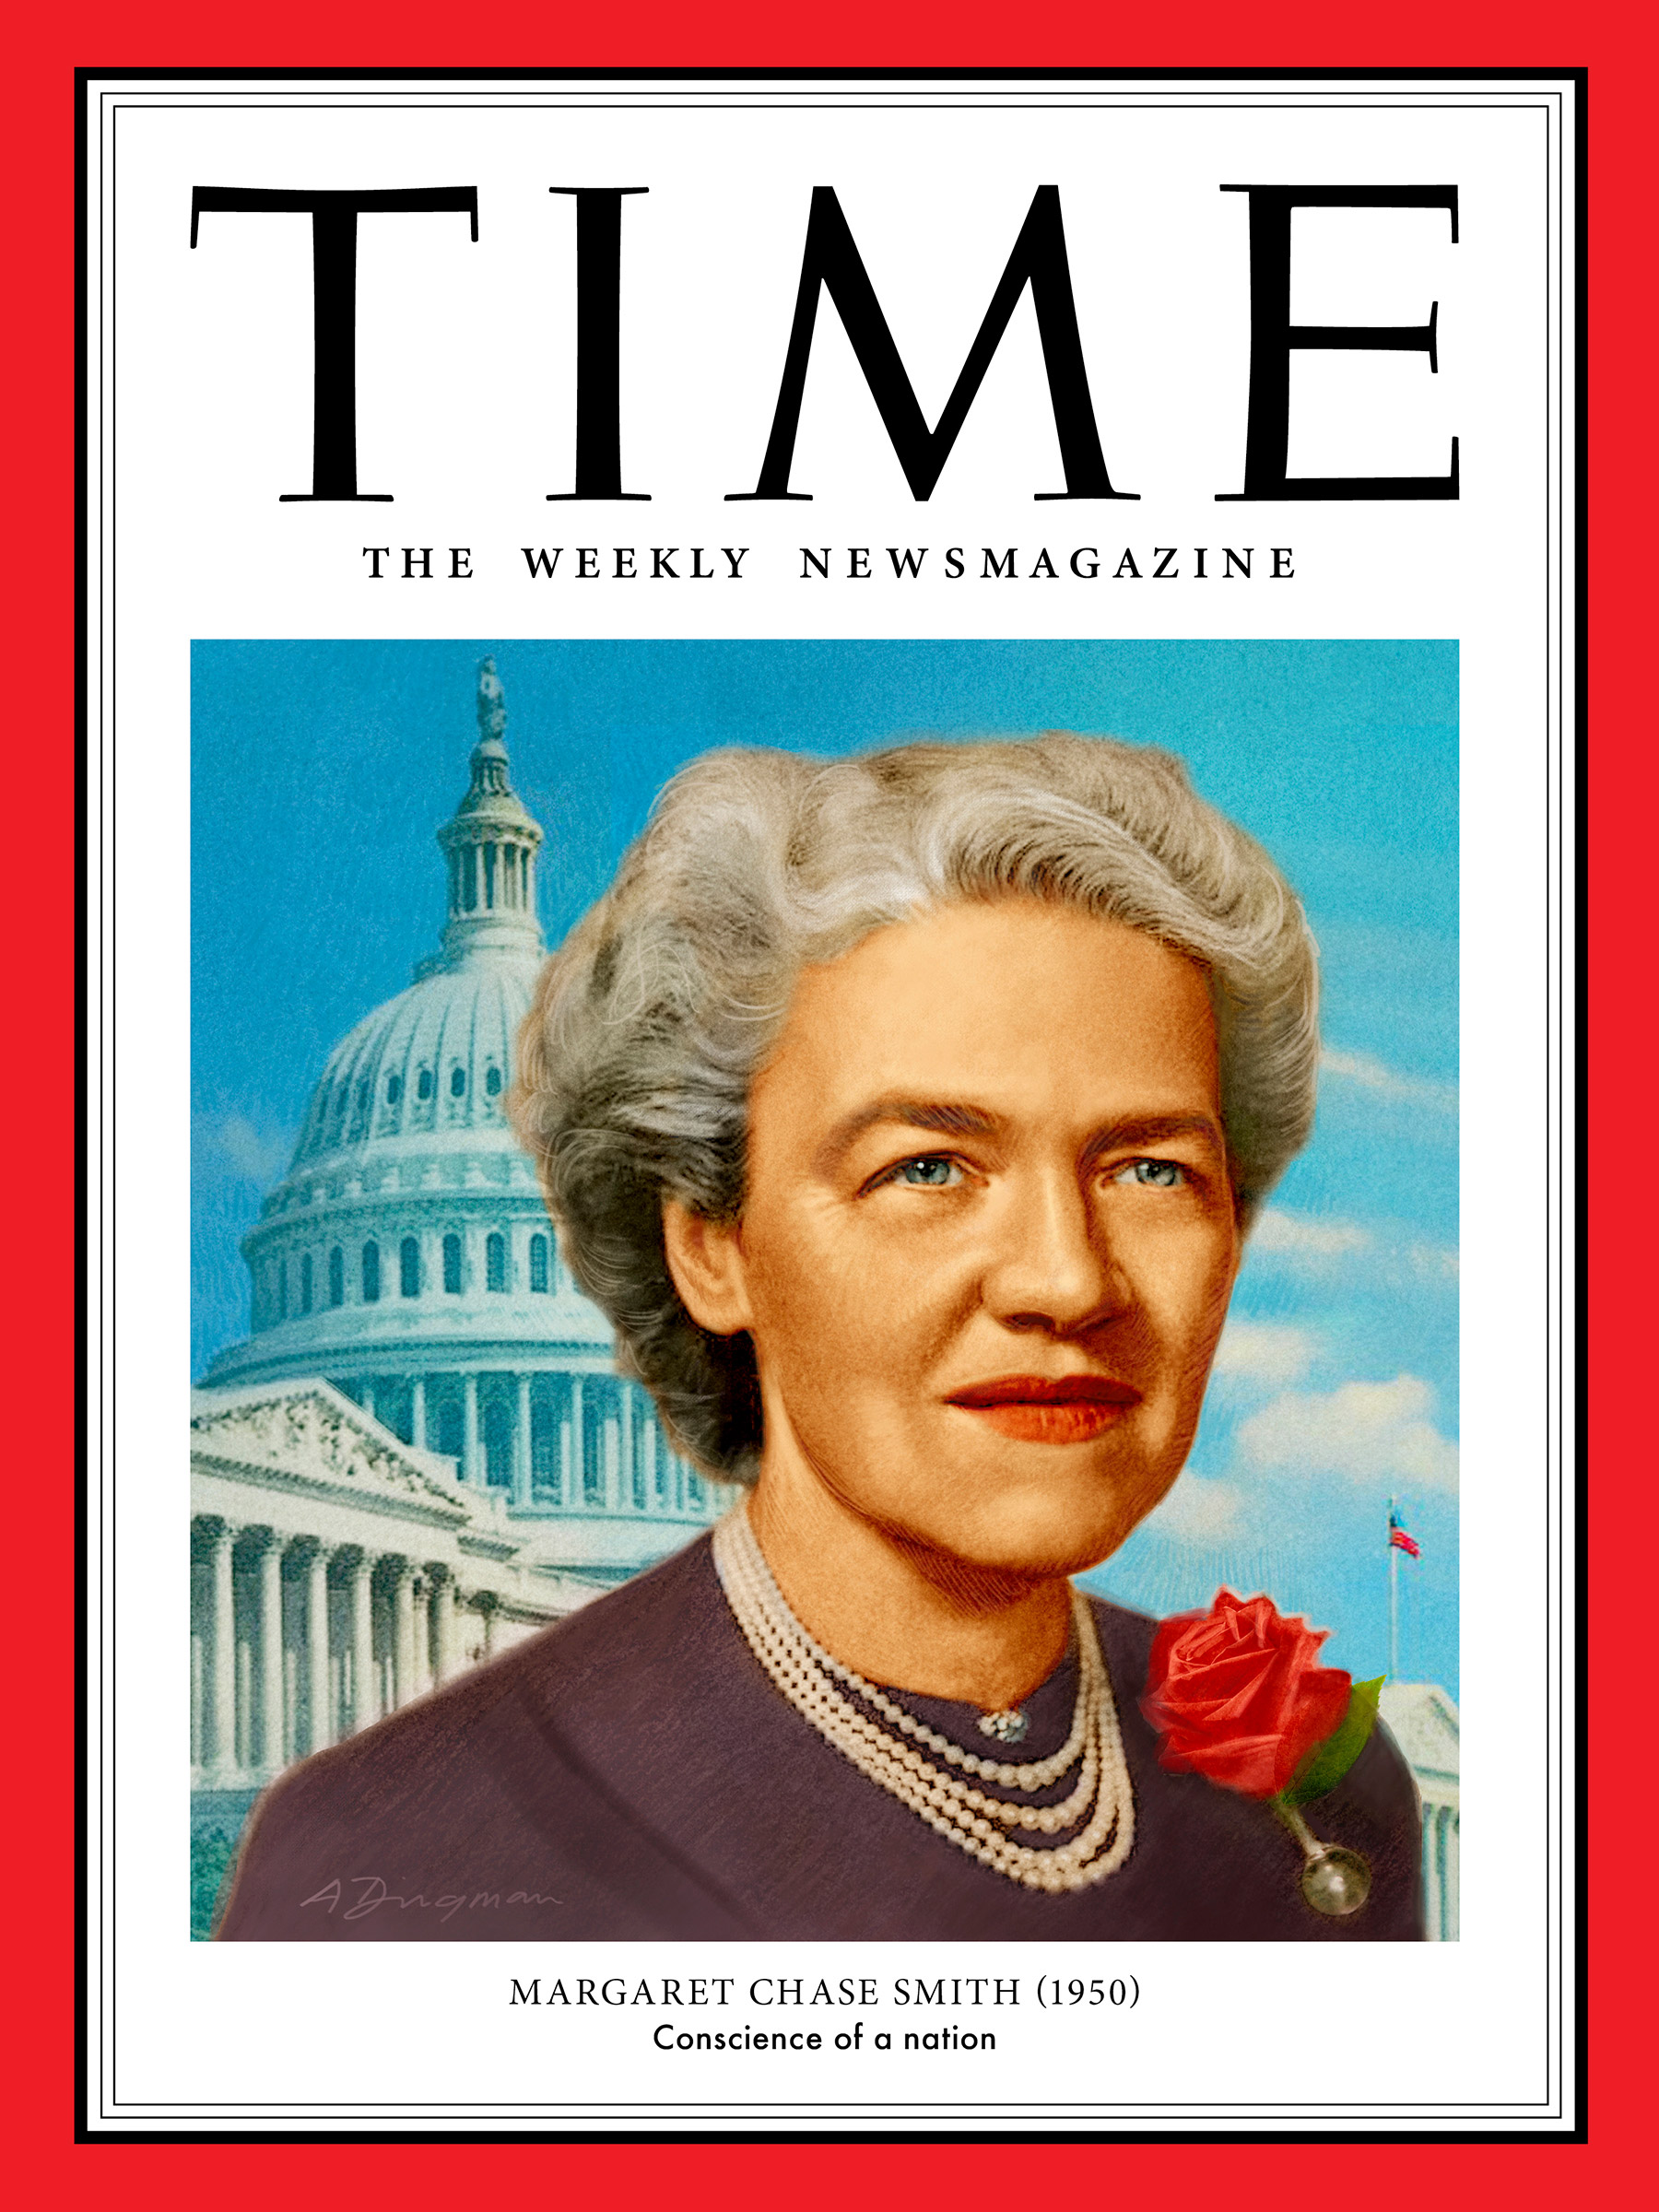 <a href="https://fineartamerica.com/featured/margaret-chase-smith-1950-time.html"><strong>Buy the cover art→</strong></a> (Illustration by Alan Dingman for TIME; Bettmann/Getty)